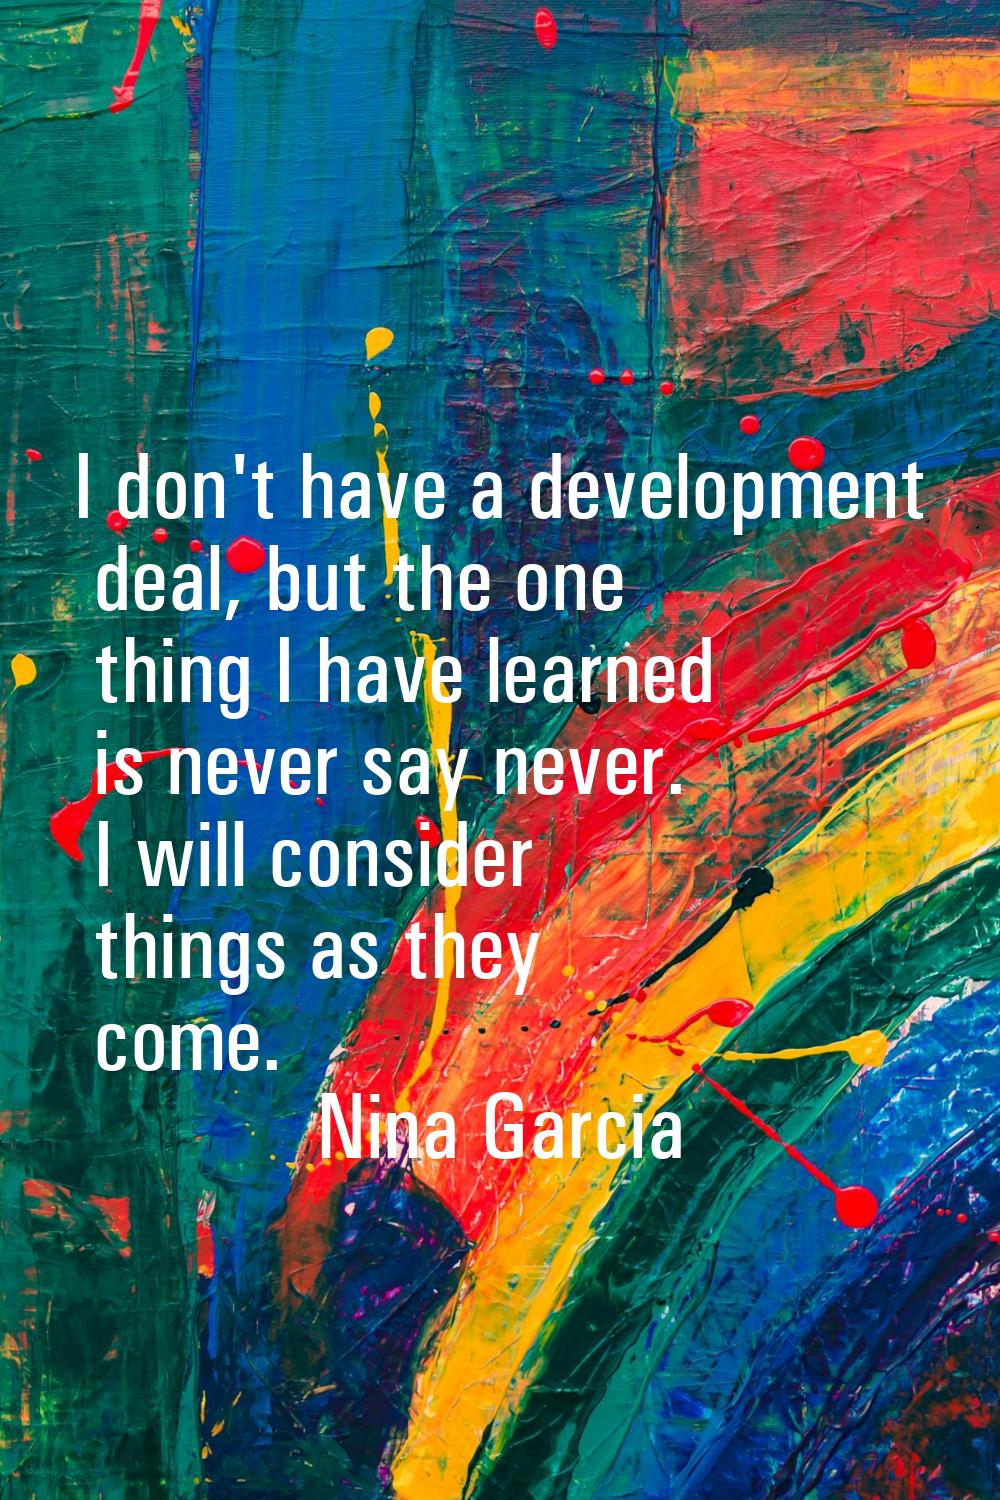 I don't have a development deal, but the one thing I have learned is never say never. I will consid